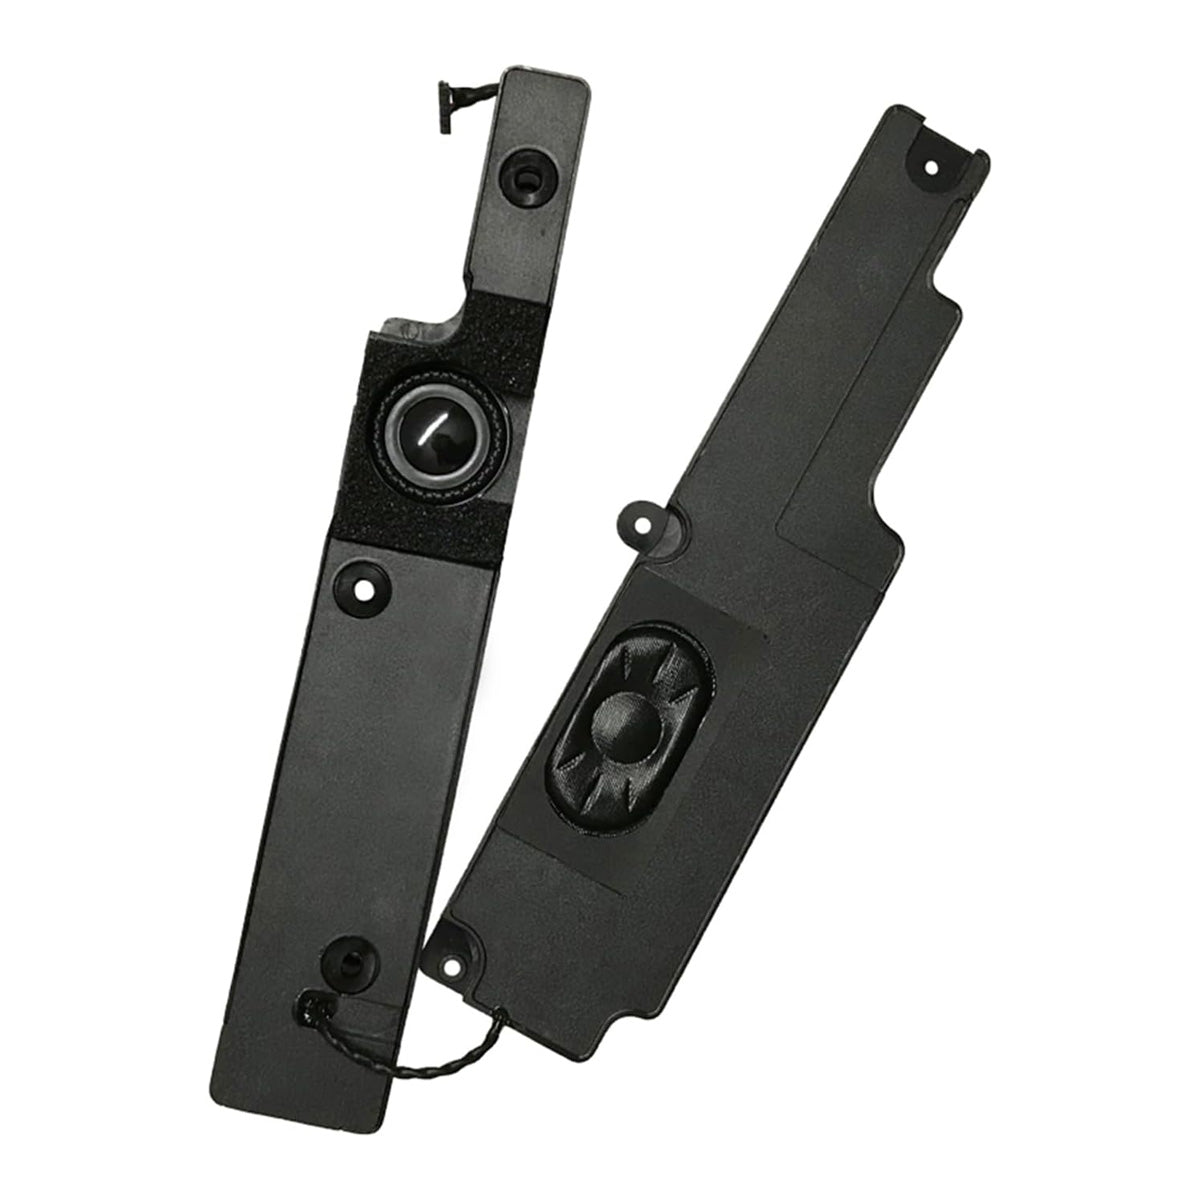 SEVEN PUPPY Brand NEW Left and Right Speaker Set Pair For Macbook Pro 15" A1286 2009-2012 Year Internal Speaker